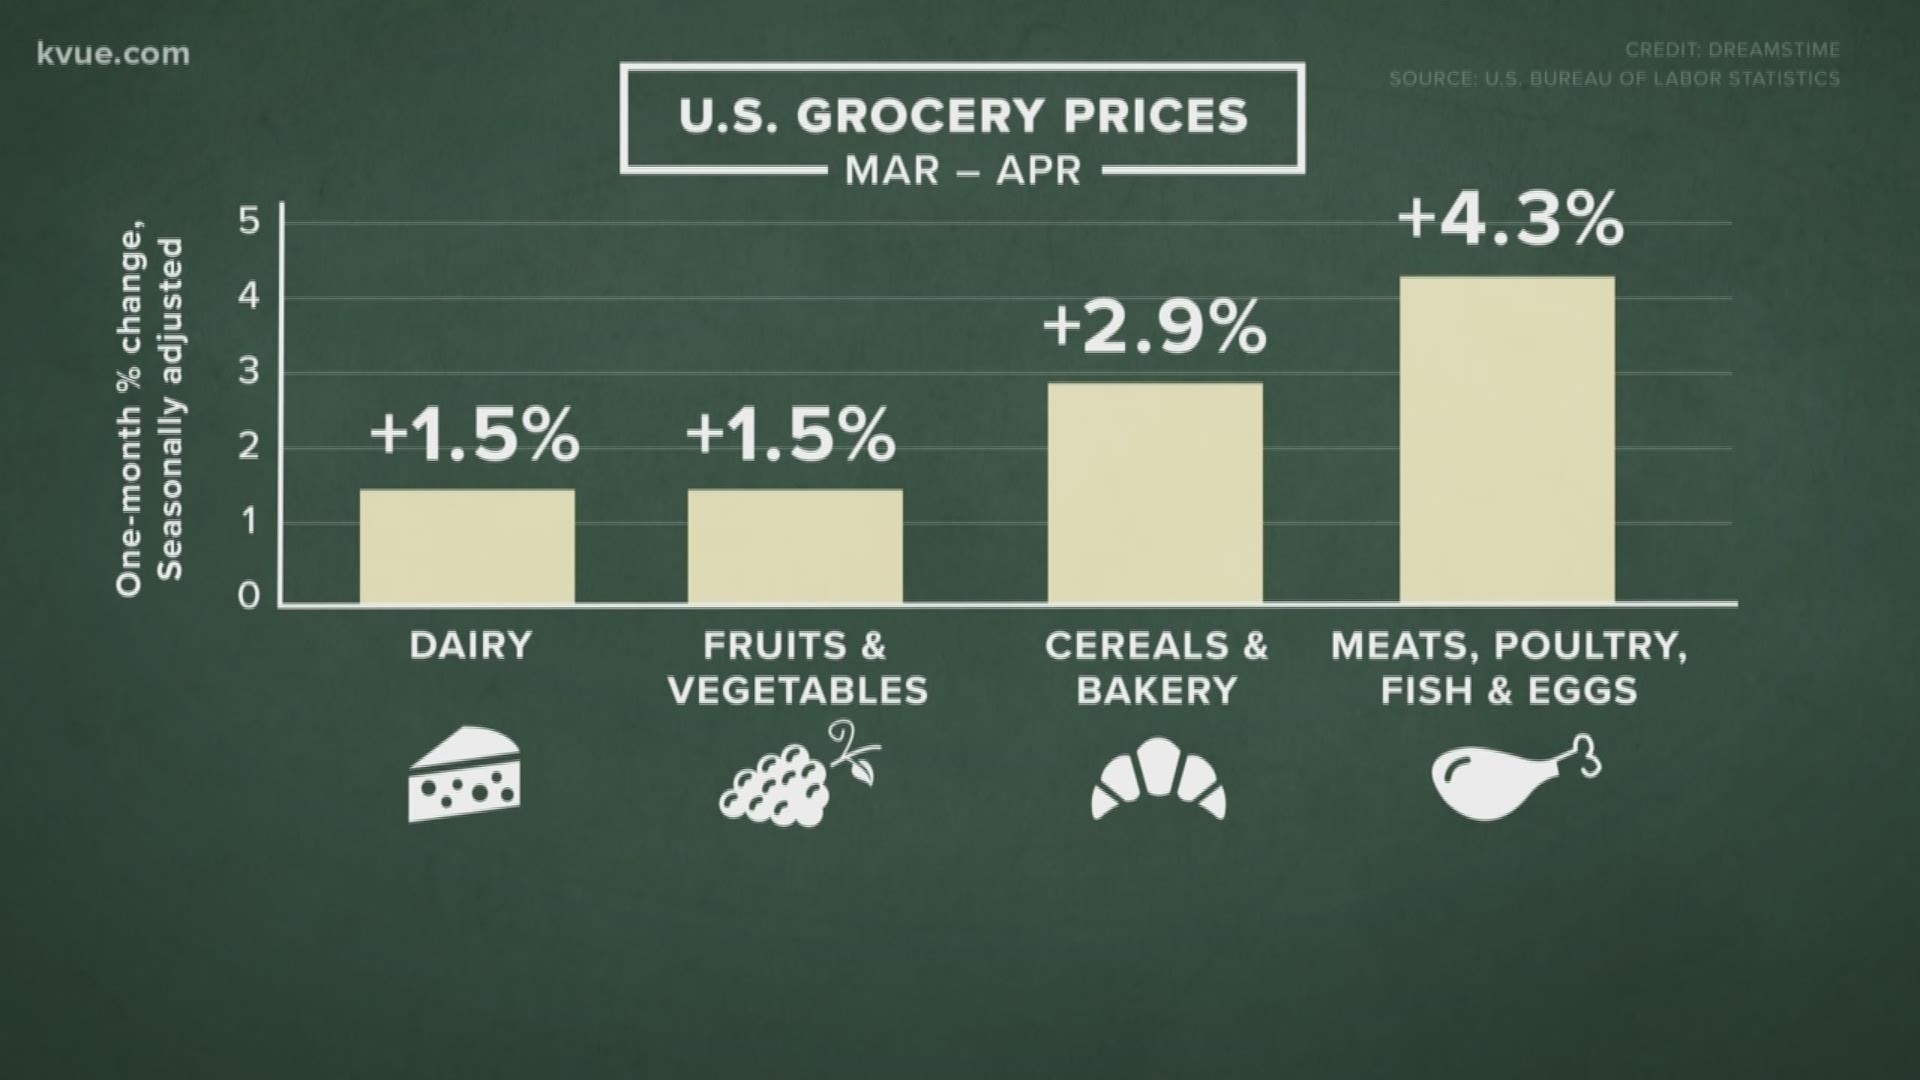 The U.S. Bureau of Labor Statistics said April saw the biggest one-month spike in grocery store prices since 1974 – and meat prices went up the most.